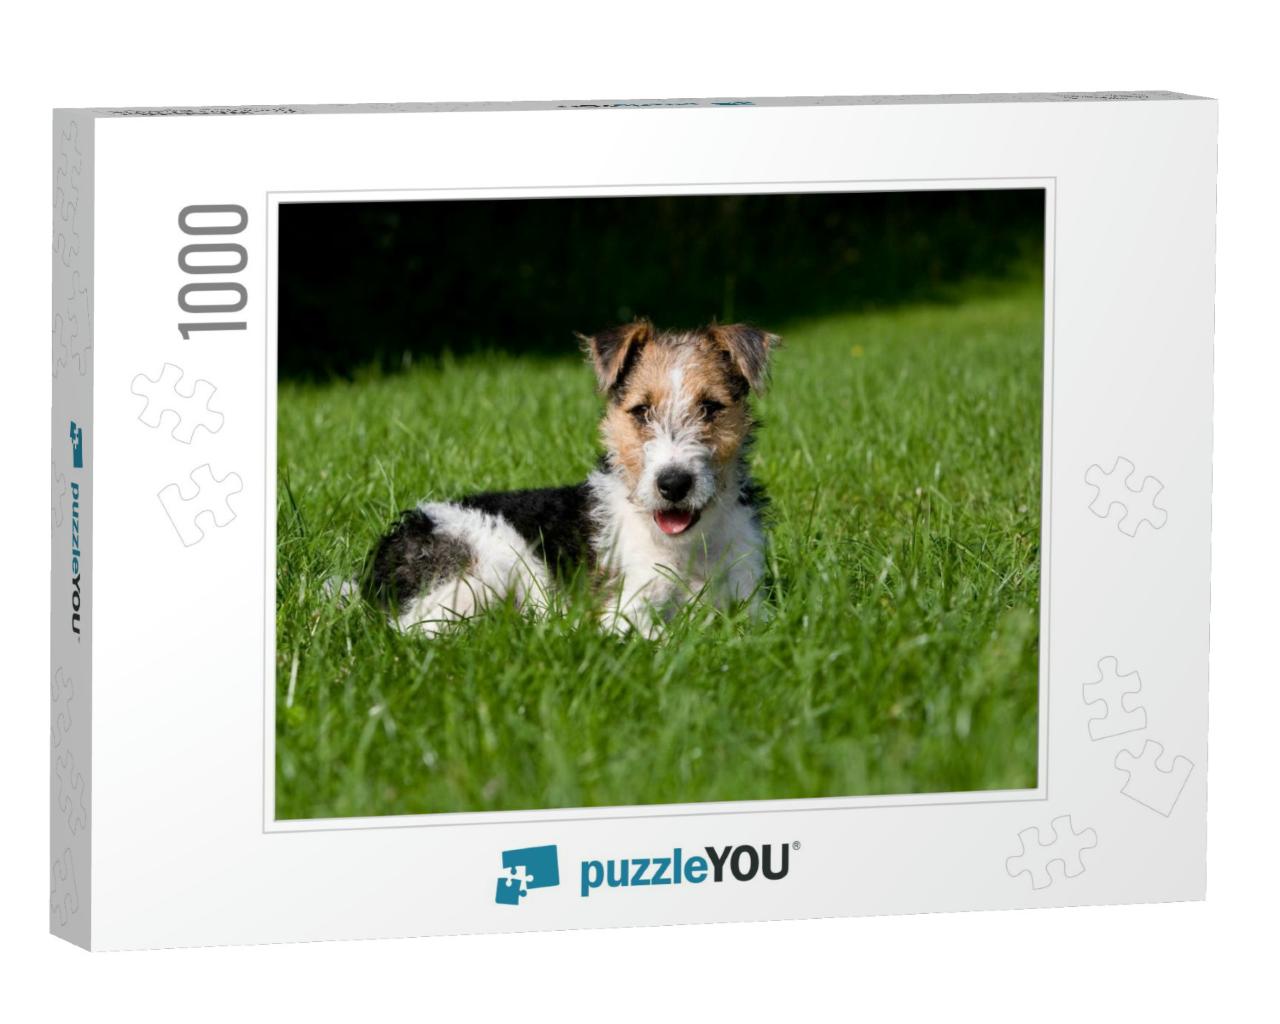 Wire-Haired Fox Terrier Dog, Pup Laying on Lawn... Jigsaw Puzzle with 1000 pieces